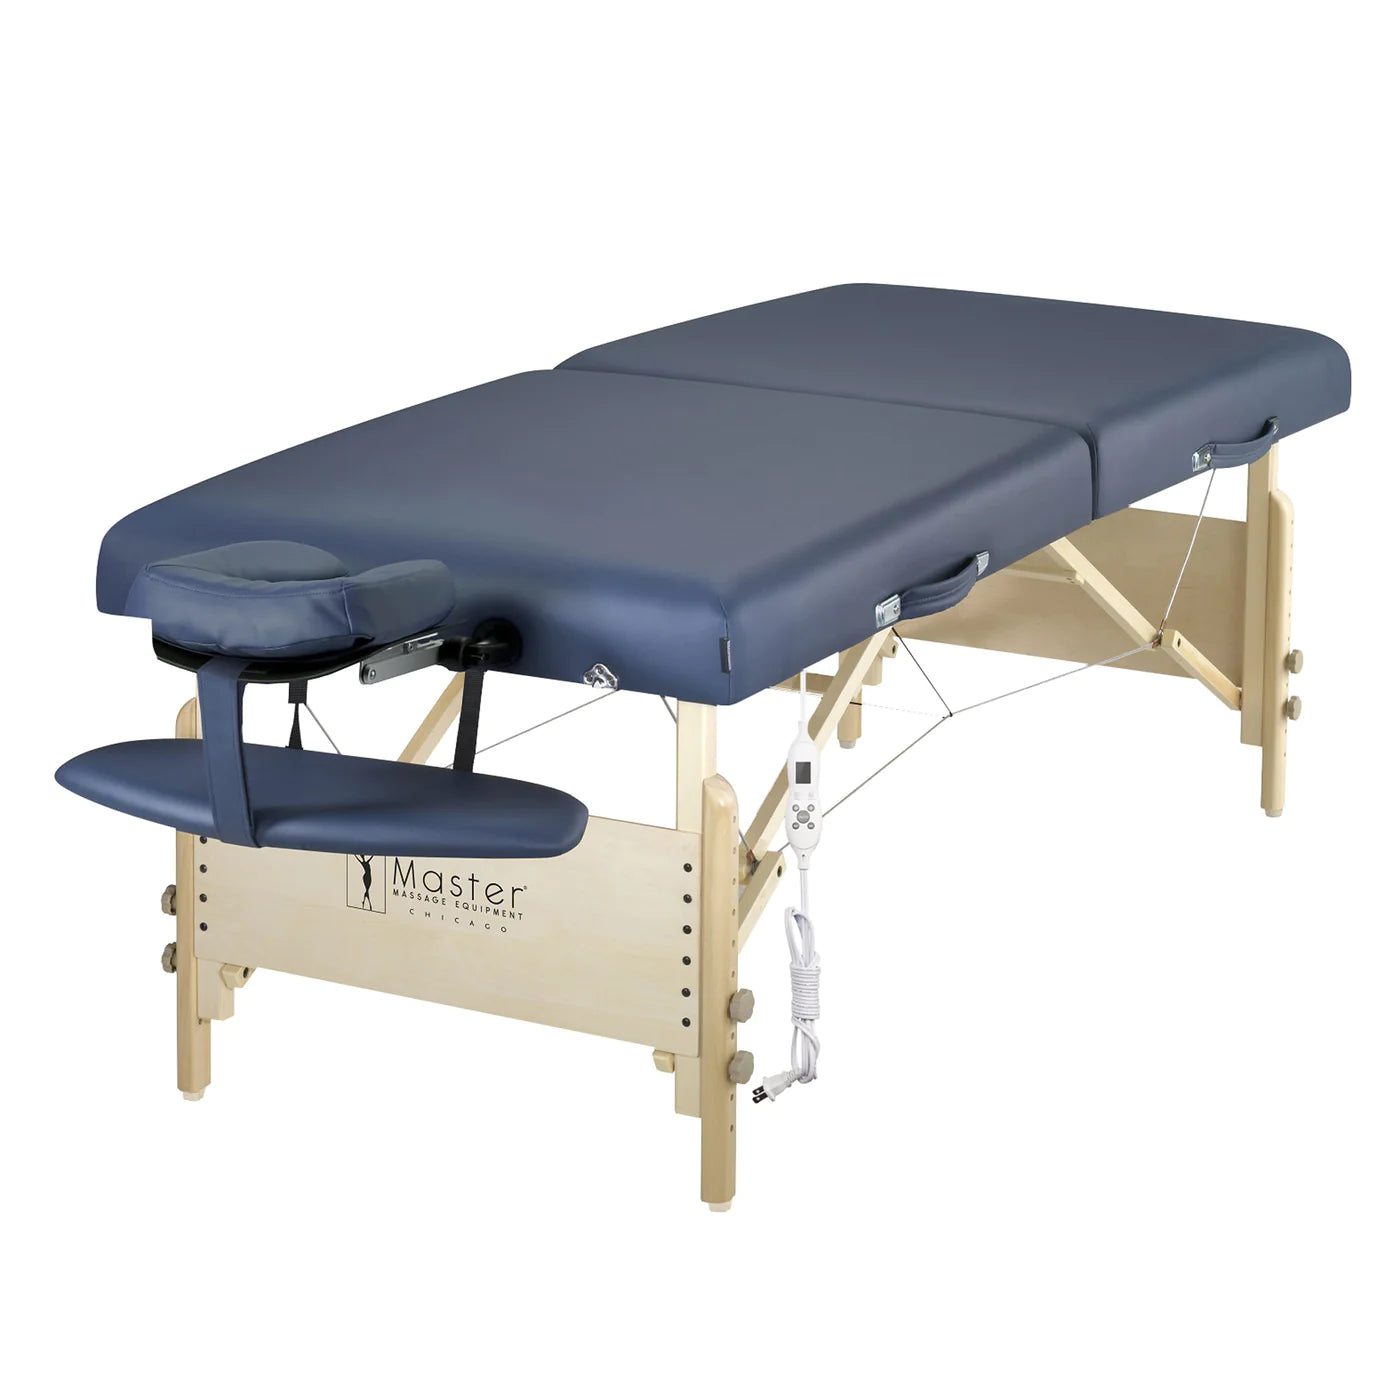 30" CORONADO™ SALON Portable Massage Table Package with Lift Back Action & a Stout 3" of Our High-density Multi-Layer Small Cell™ Foam! (Royal Blue Color)